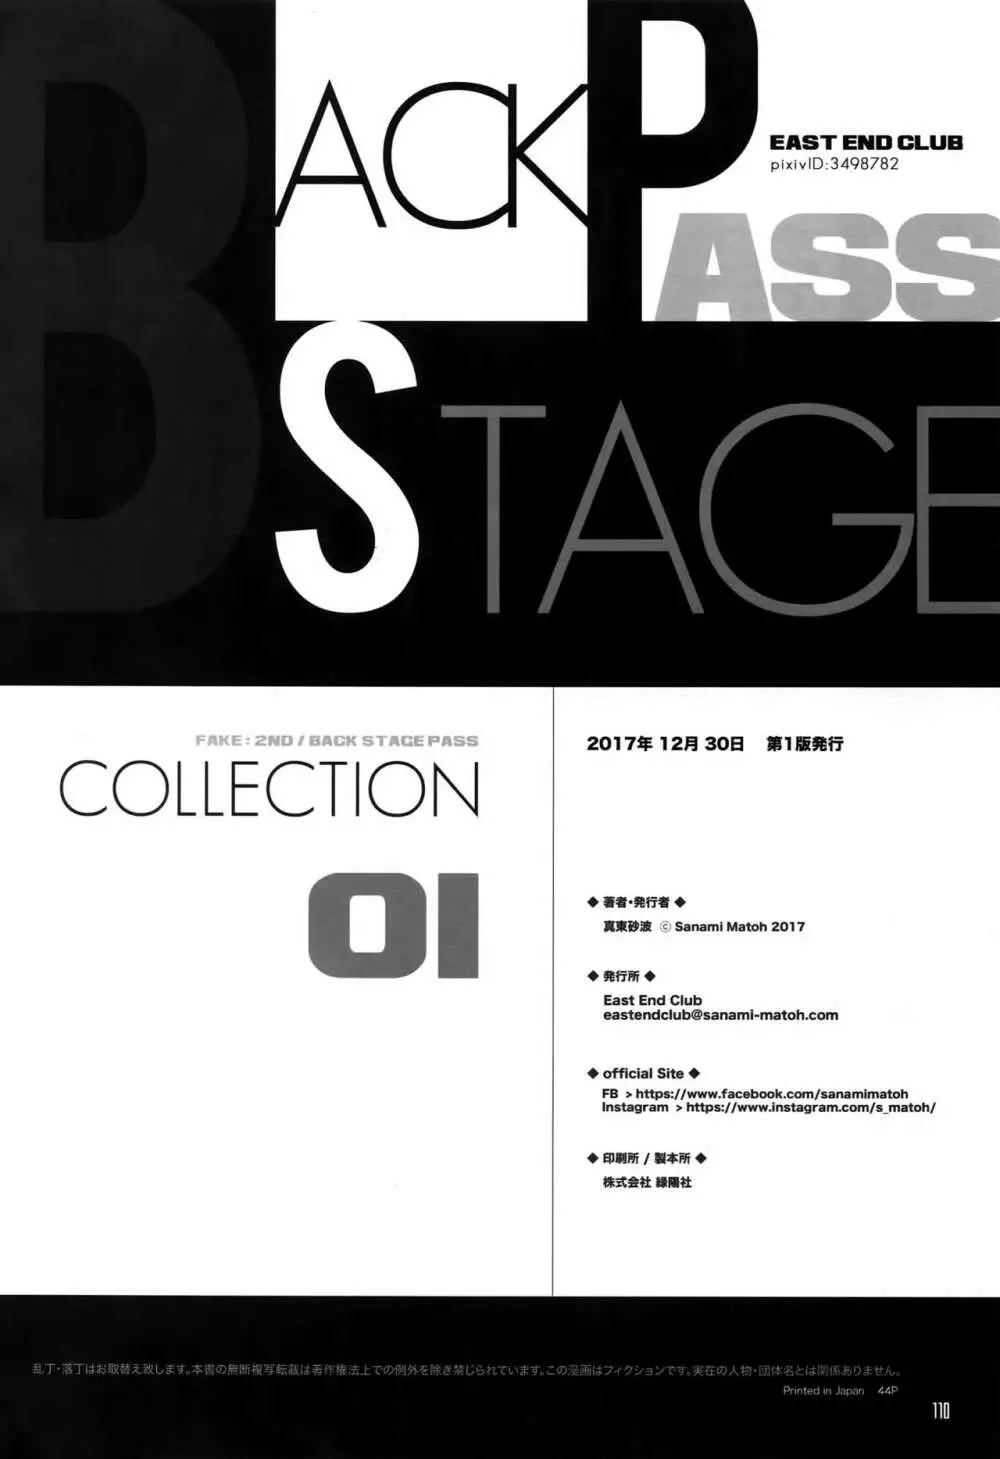 FAKE:2ND/BACK STAGE PASS COLLECTION 01 - page108